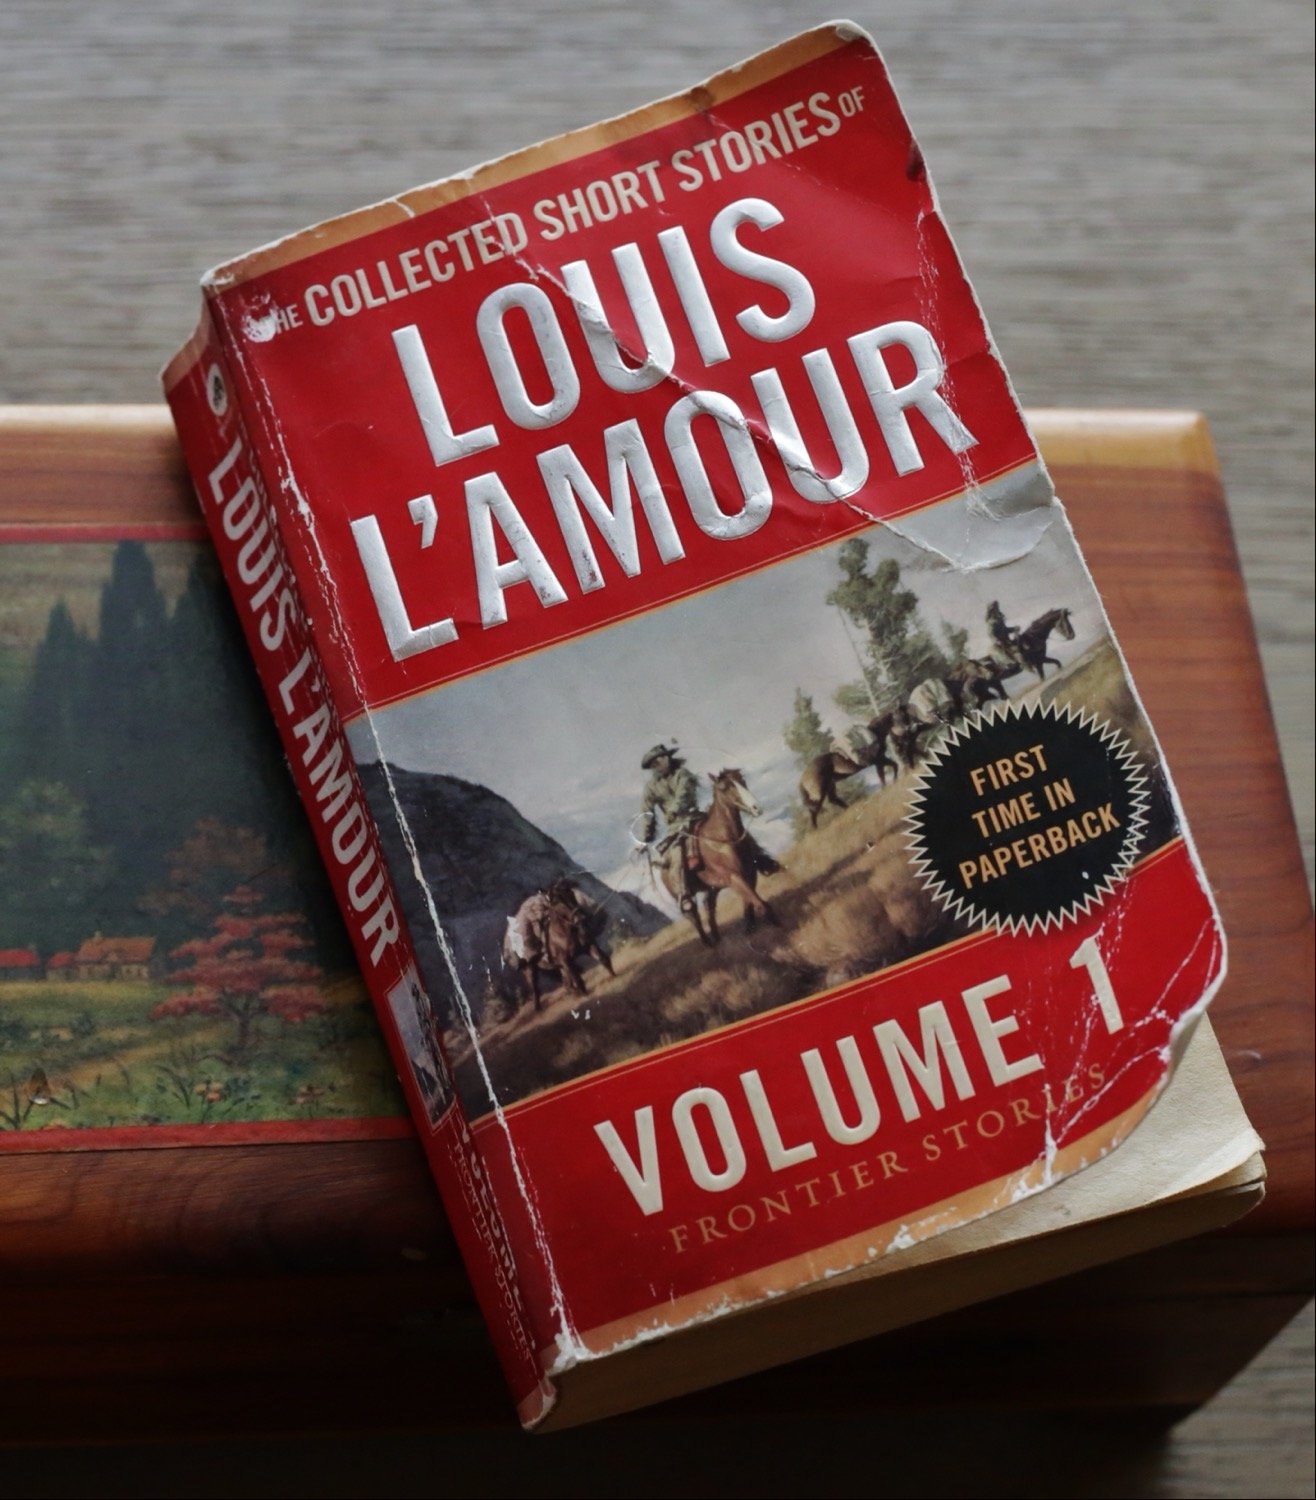 The 35 stories in volume one of the collected short stories of Louis L'Amour, the Frontier Stories, all take place "out west."